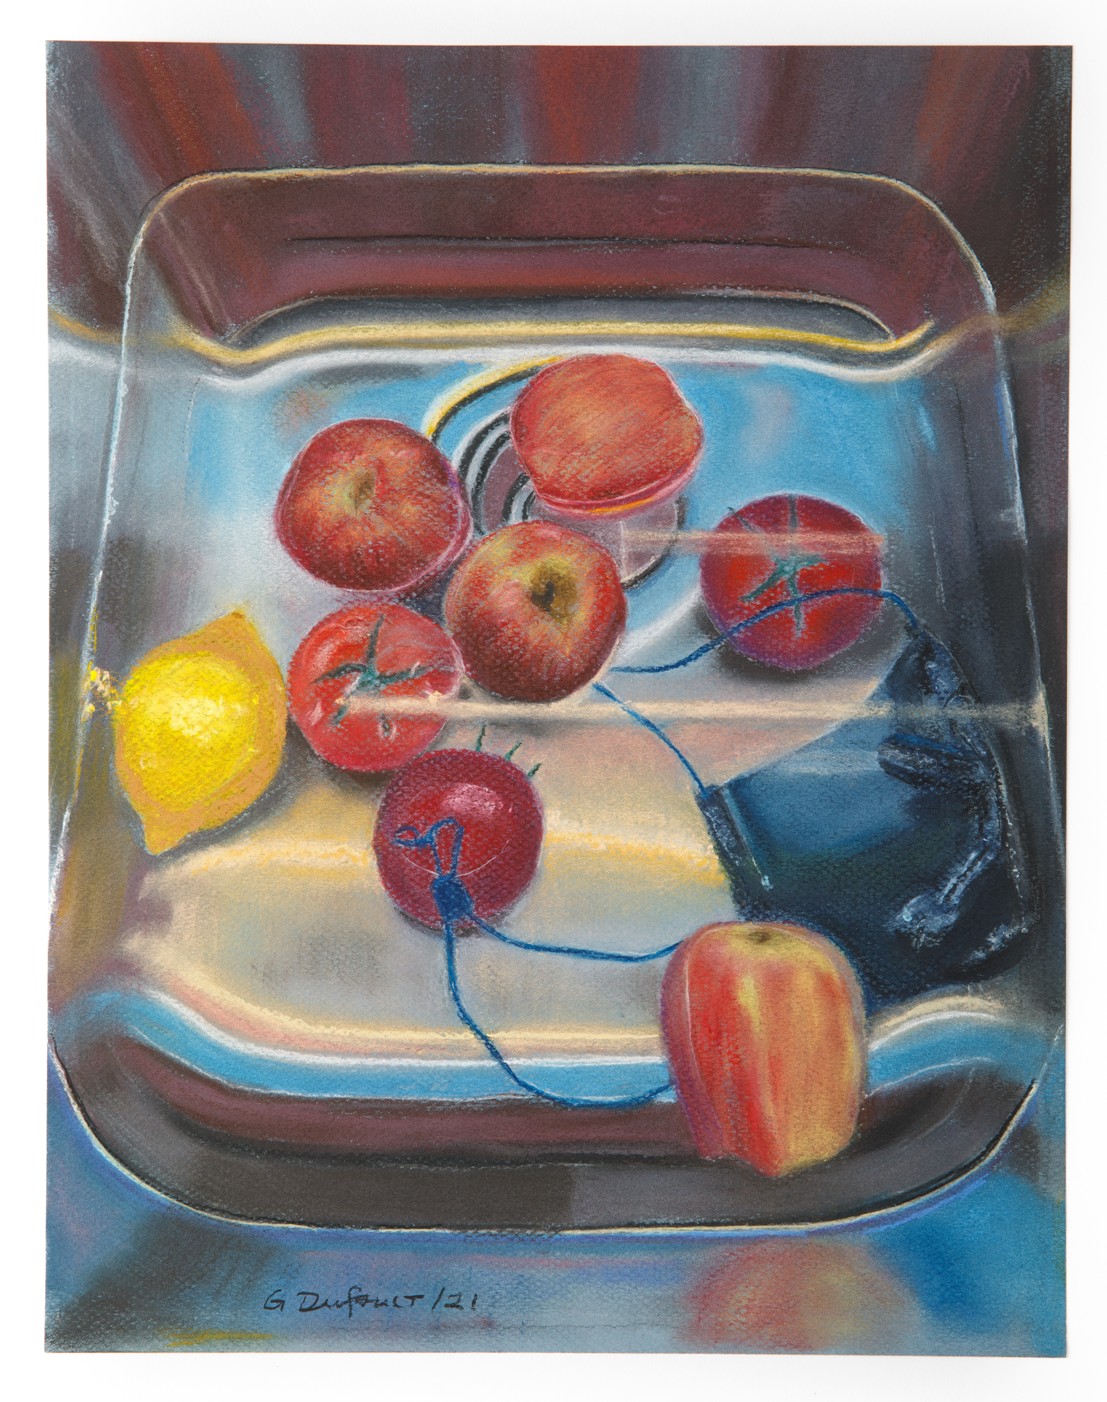 A still life artwork featuring various fruits and vegetables soaking with a face mask in a kitchen sink.